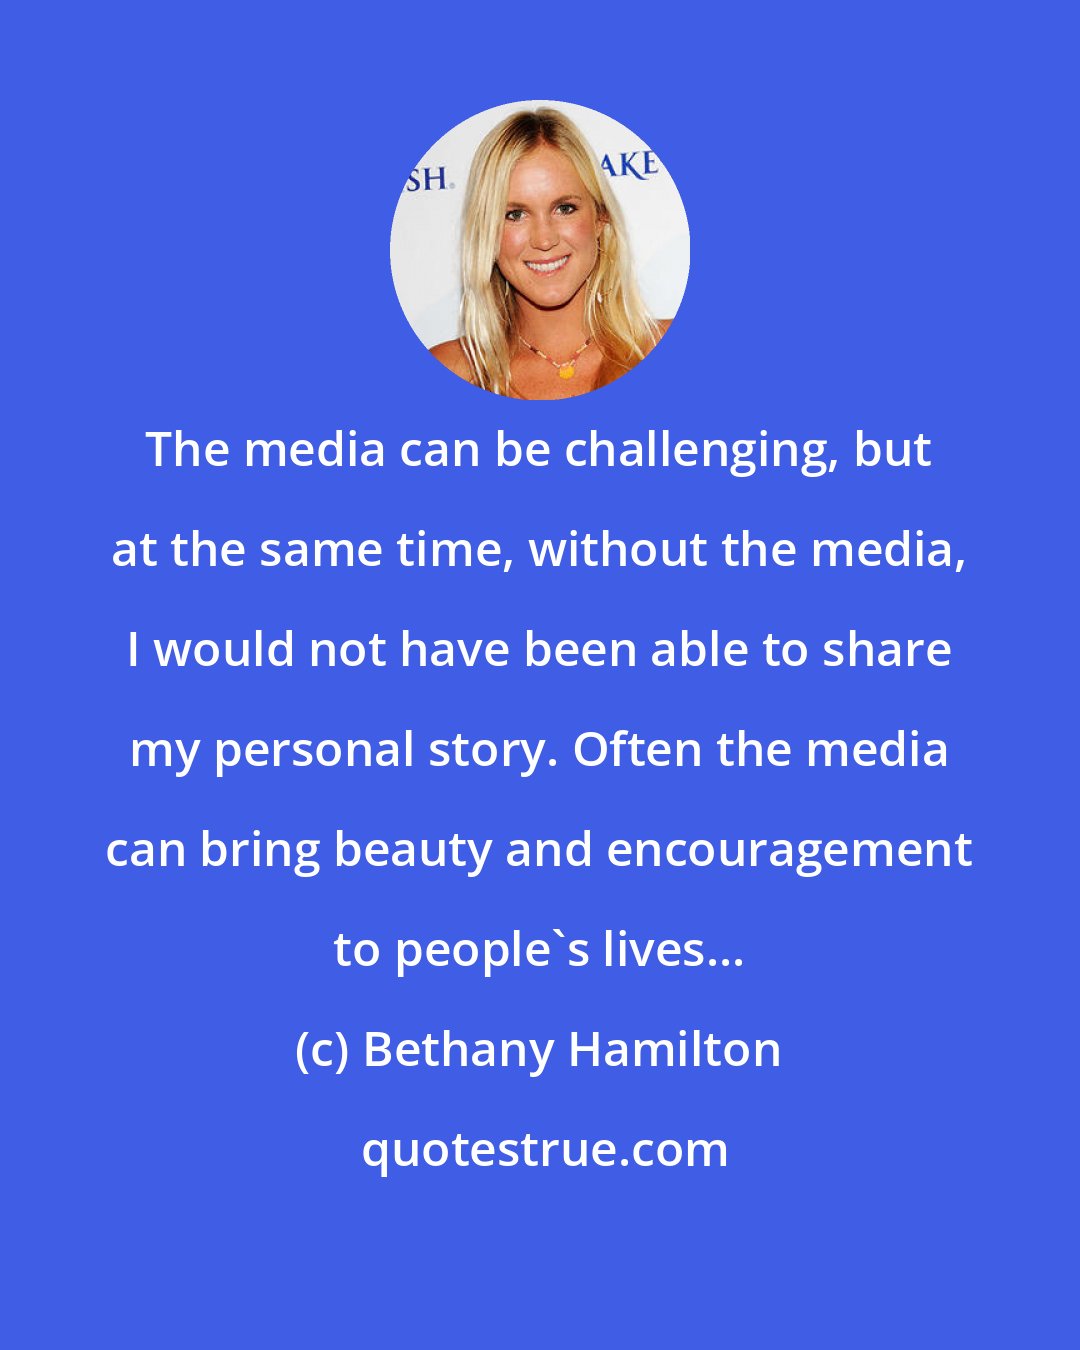 Bethany Hamilton: The media can be challenging, but at the same time, without the media, I would not have been able to share my personal story. Often the media can bring beauty and encouragement to people's lives...